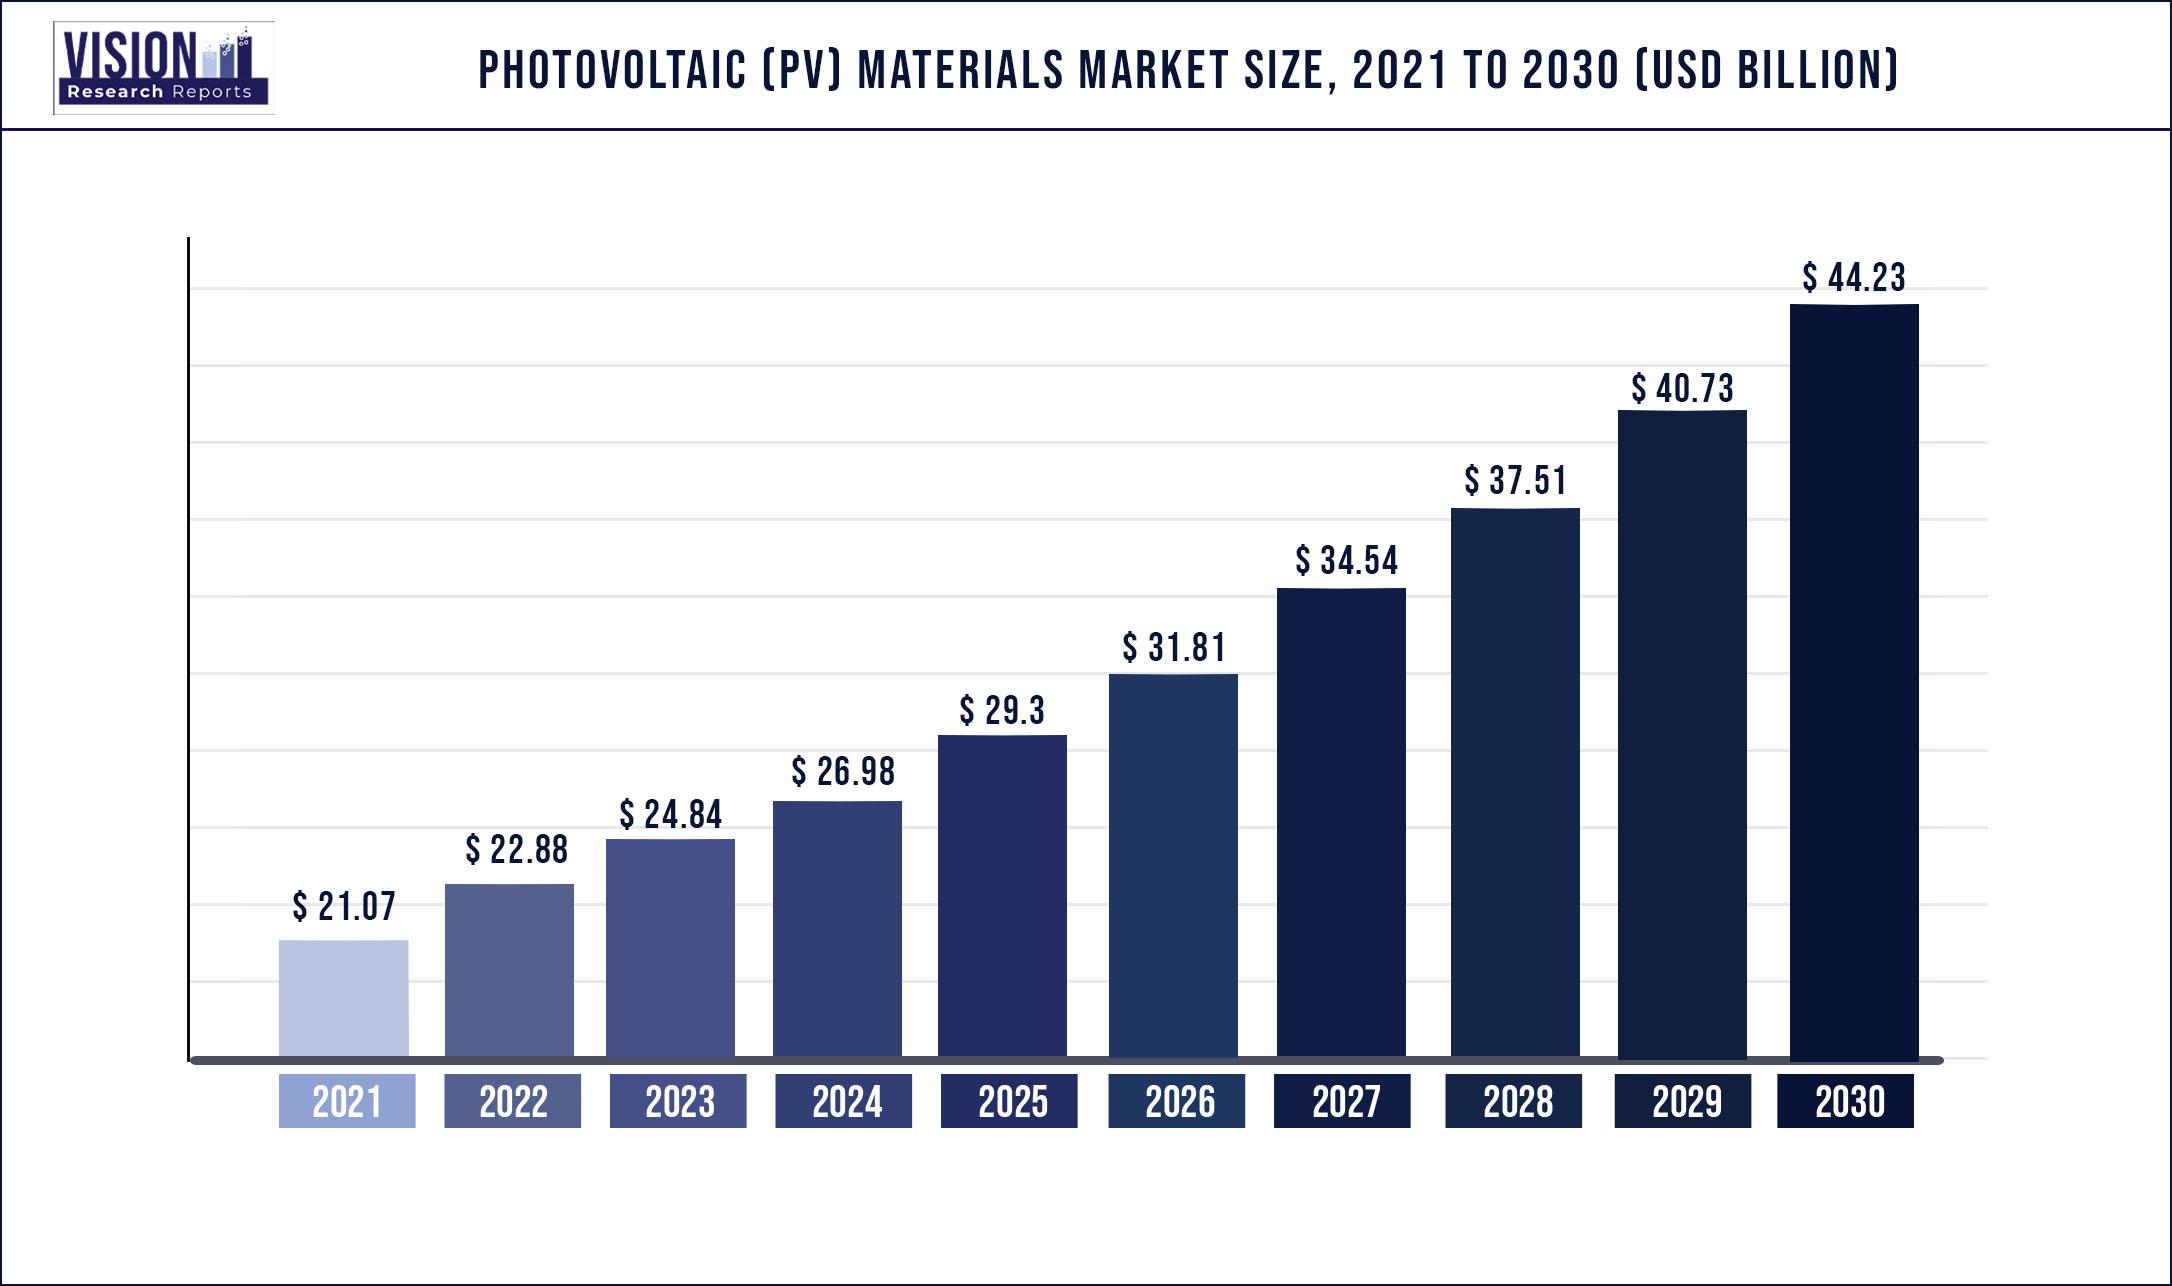 Photovoltaic (PV) Materials Market Size 2021 to 2030